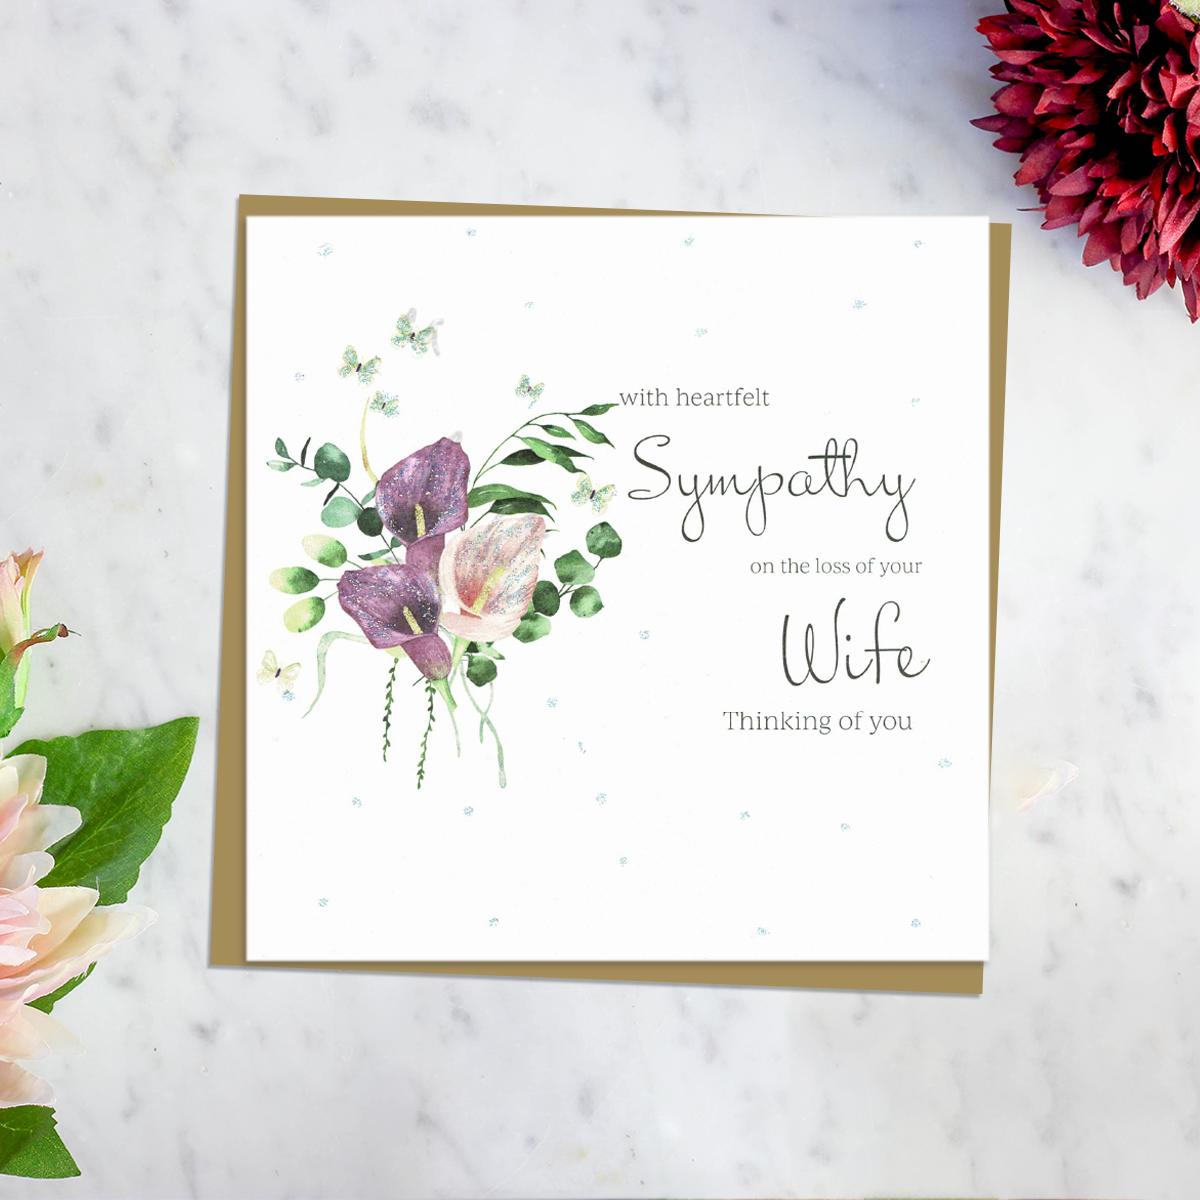 ' With Heartfelt Sympathy On The Loss Of Your Wife Thinking Of You' Card Featuring Beautiful Pink And Purple Calla Lillies. With Discreet Sparkle And Brown Envelope. Blank For Own Message